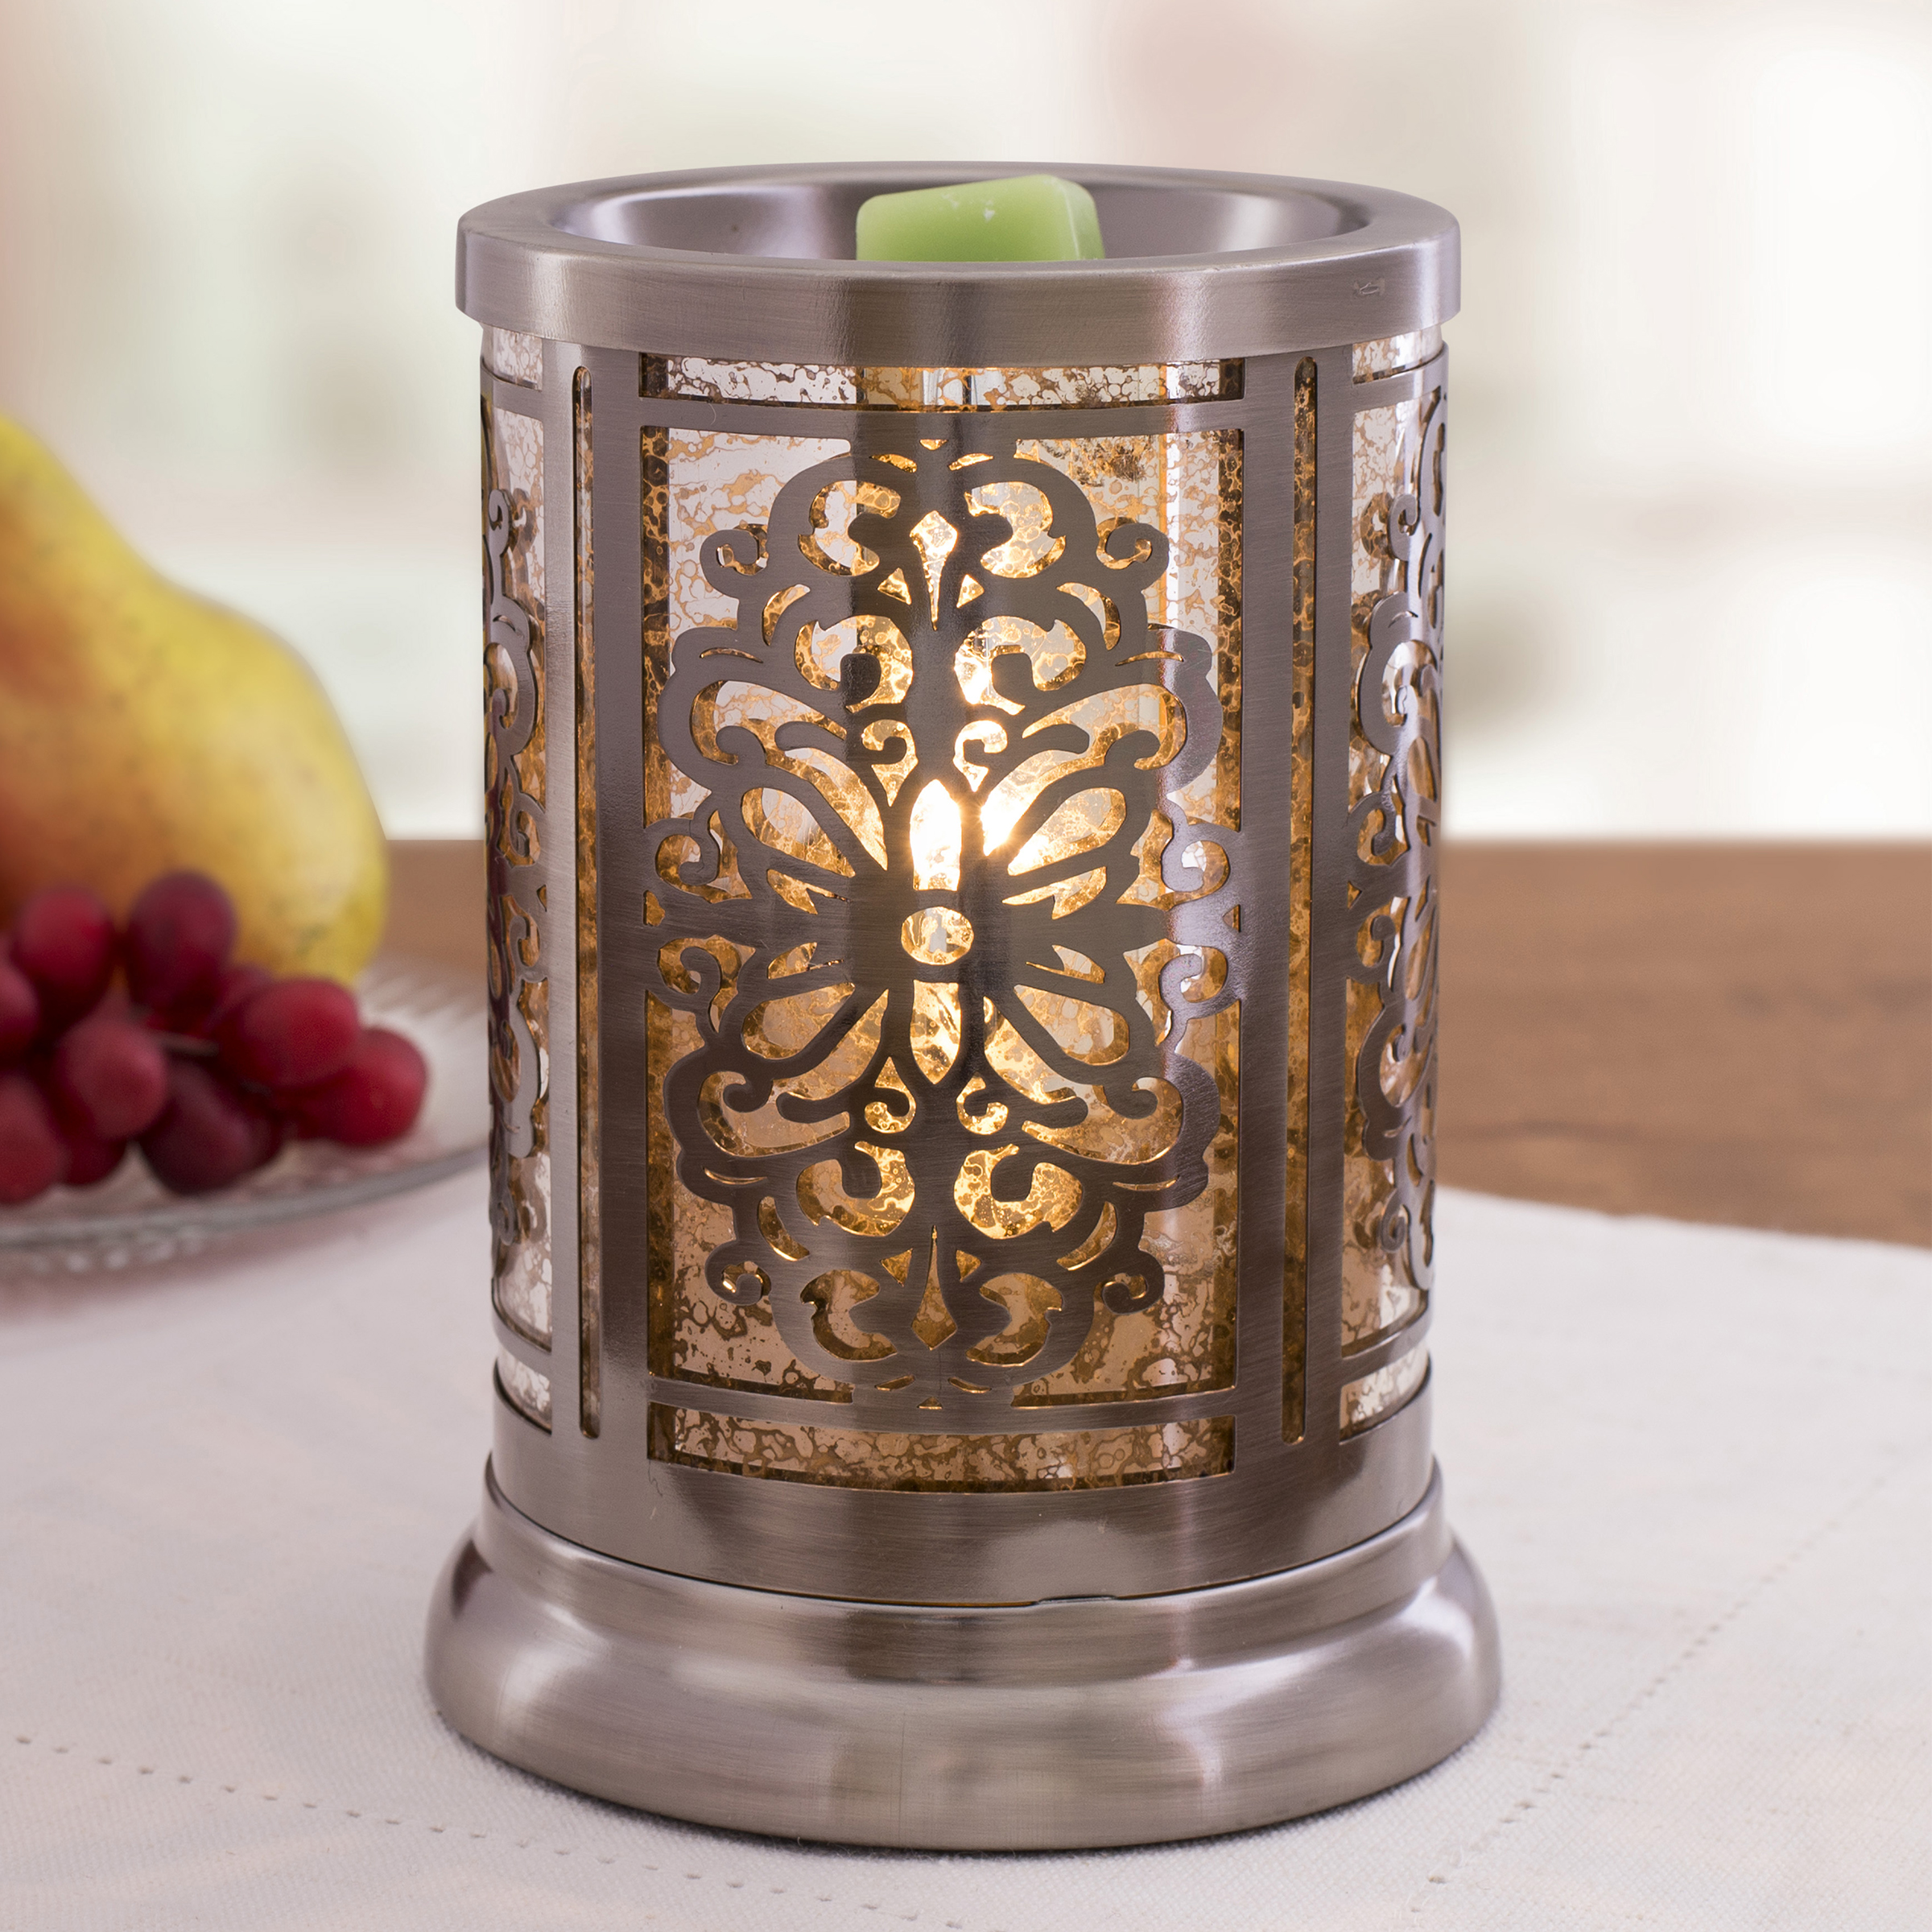 ScentSationals Charleston Full-Size Scented Wax Warmer - image 3 of 8